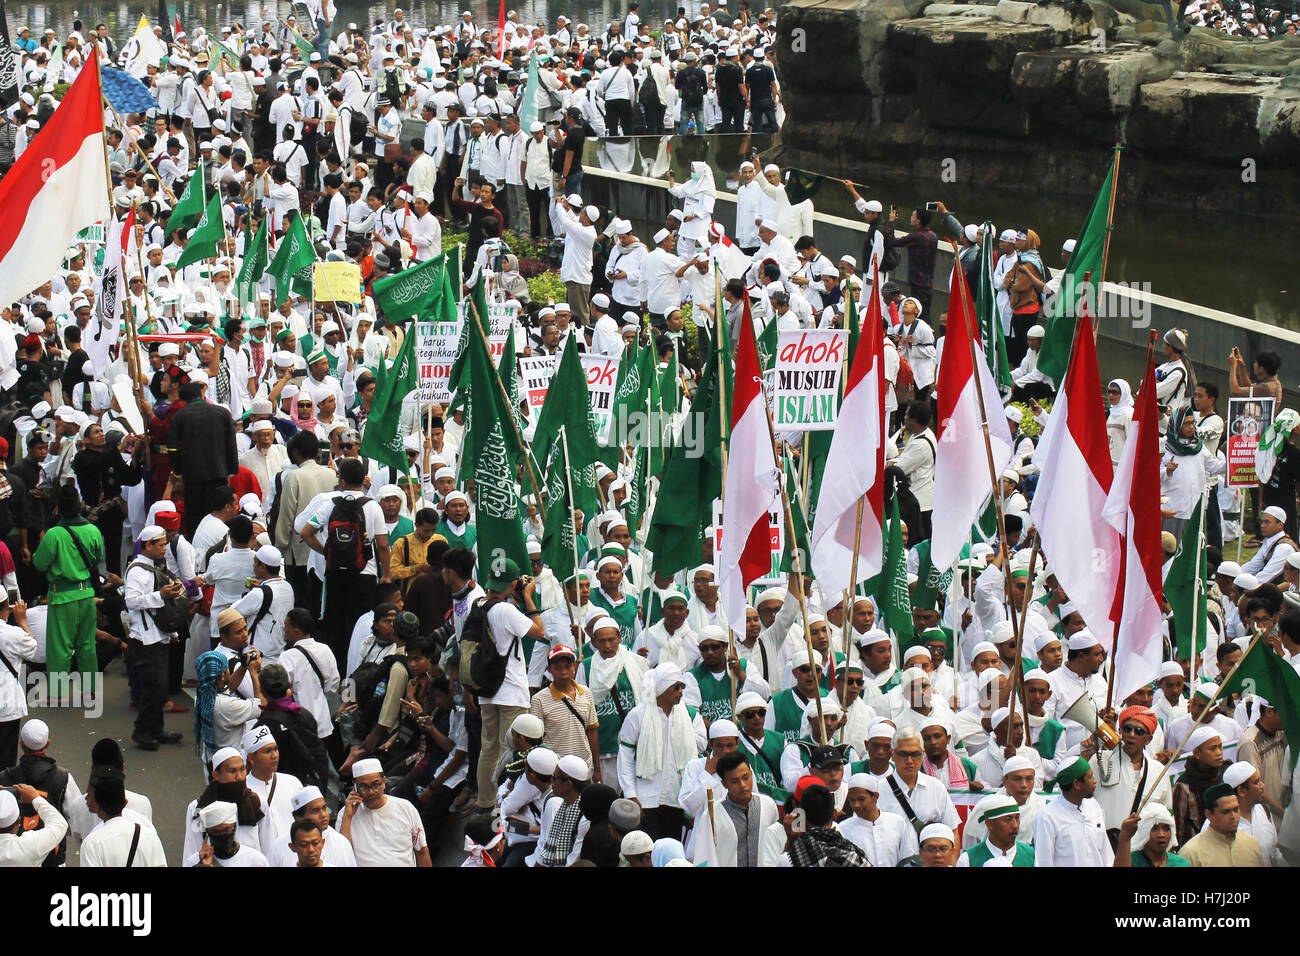 Moslem people alliances held a huge rally to condemn the blasphemy of their religion in the center of Jakarta City. Stock Photo